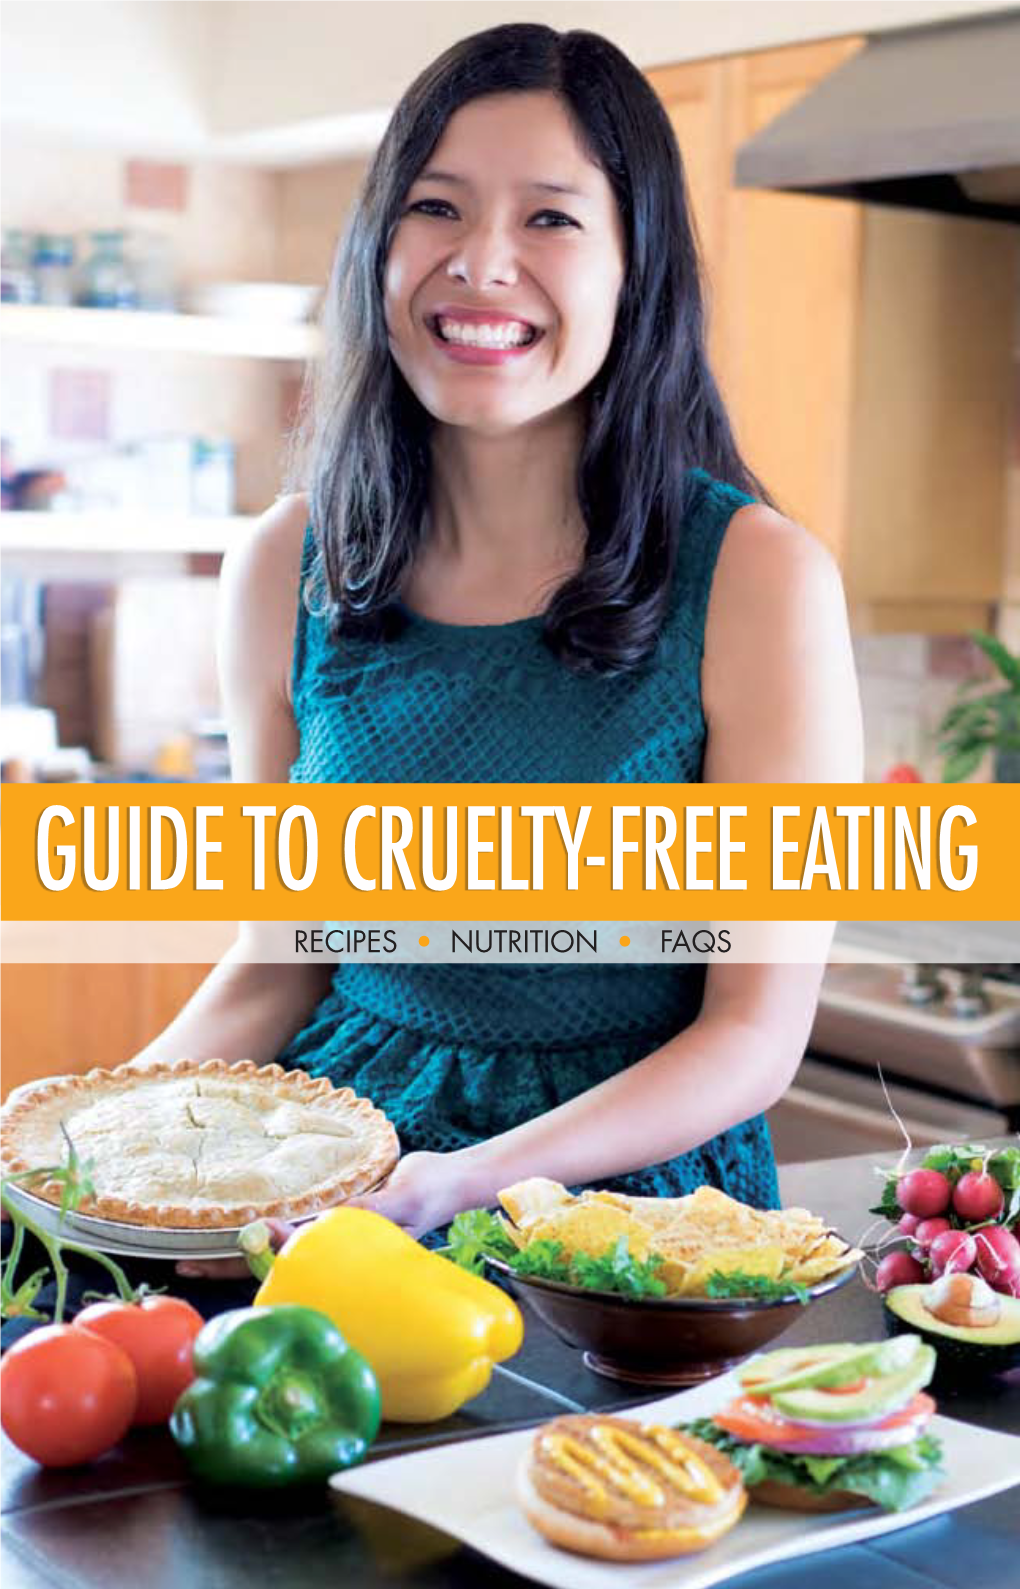 Guide to Cruelty-Free Eating Recipes • Nutrition • Faqs Choosing Compassion EATING CRUELTY-FREE